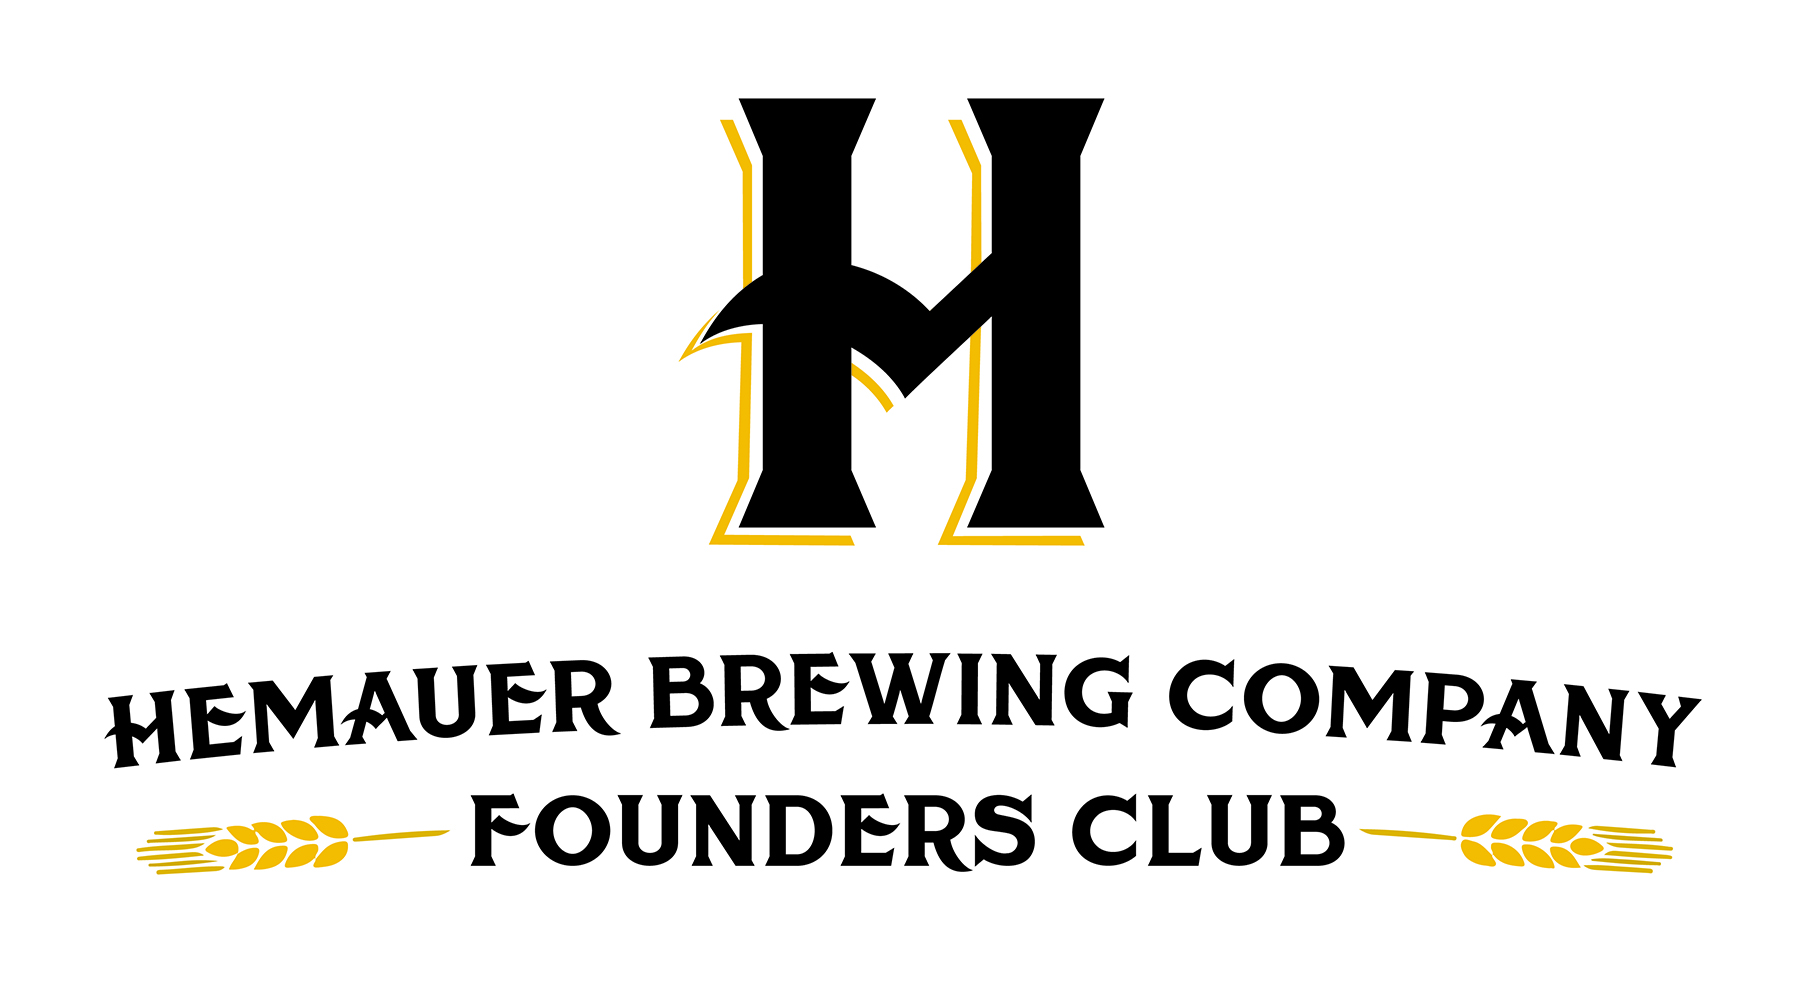 Announcing the Hemauer Brewing Co. Founders Club! | Hemauer Brewing Co.